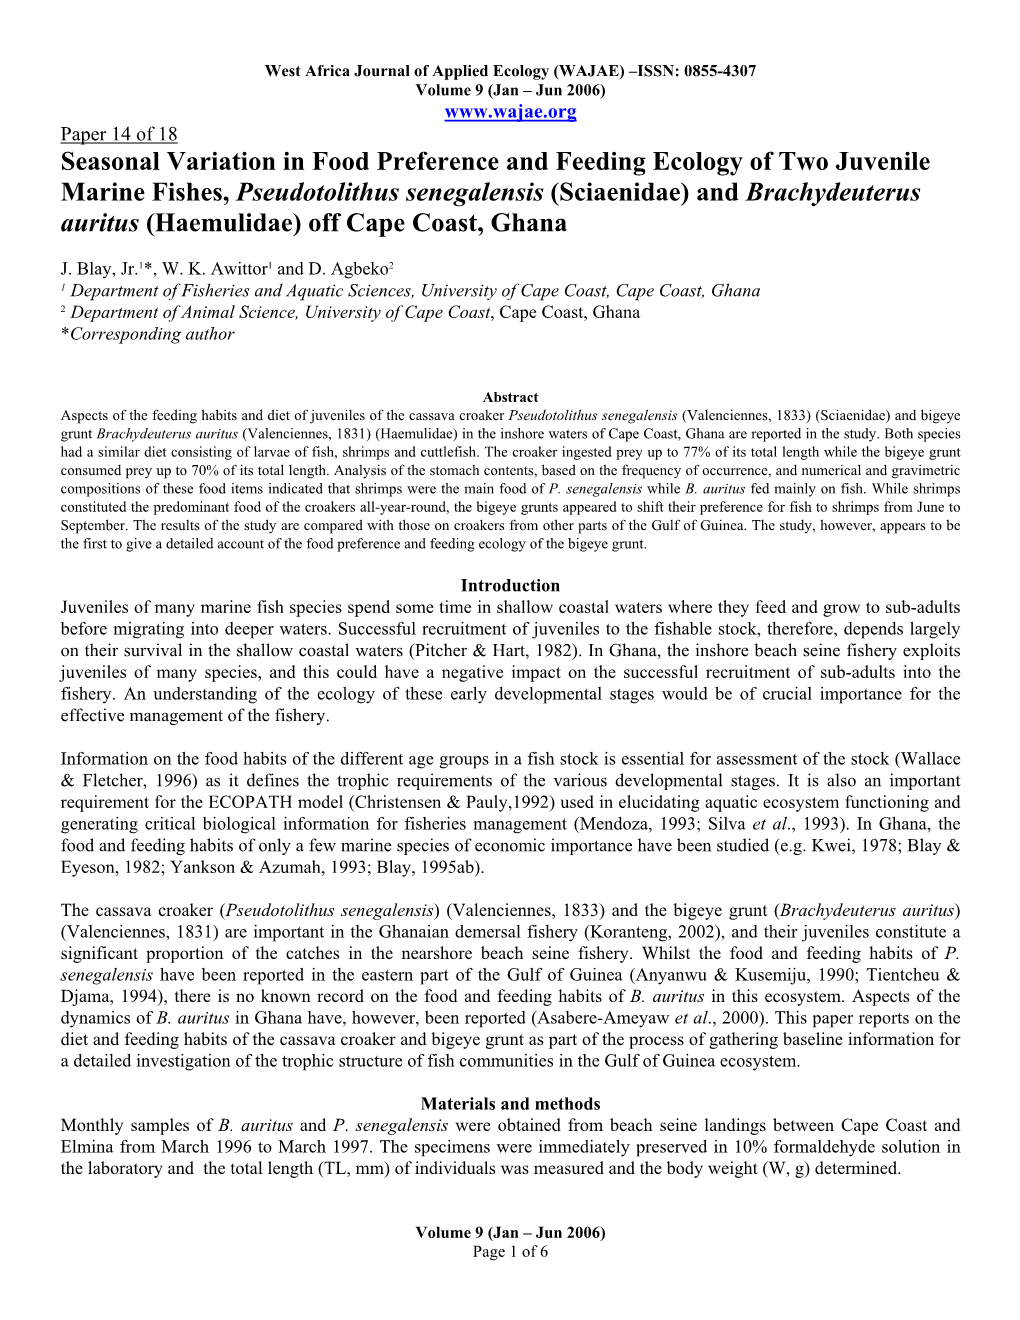 Seasonal Variation in Food Preference and Feeding Ecology Of